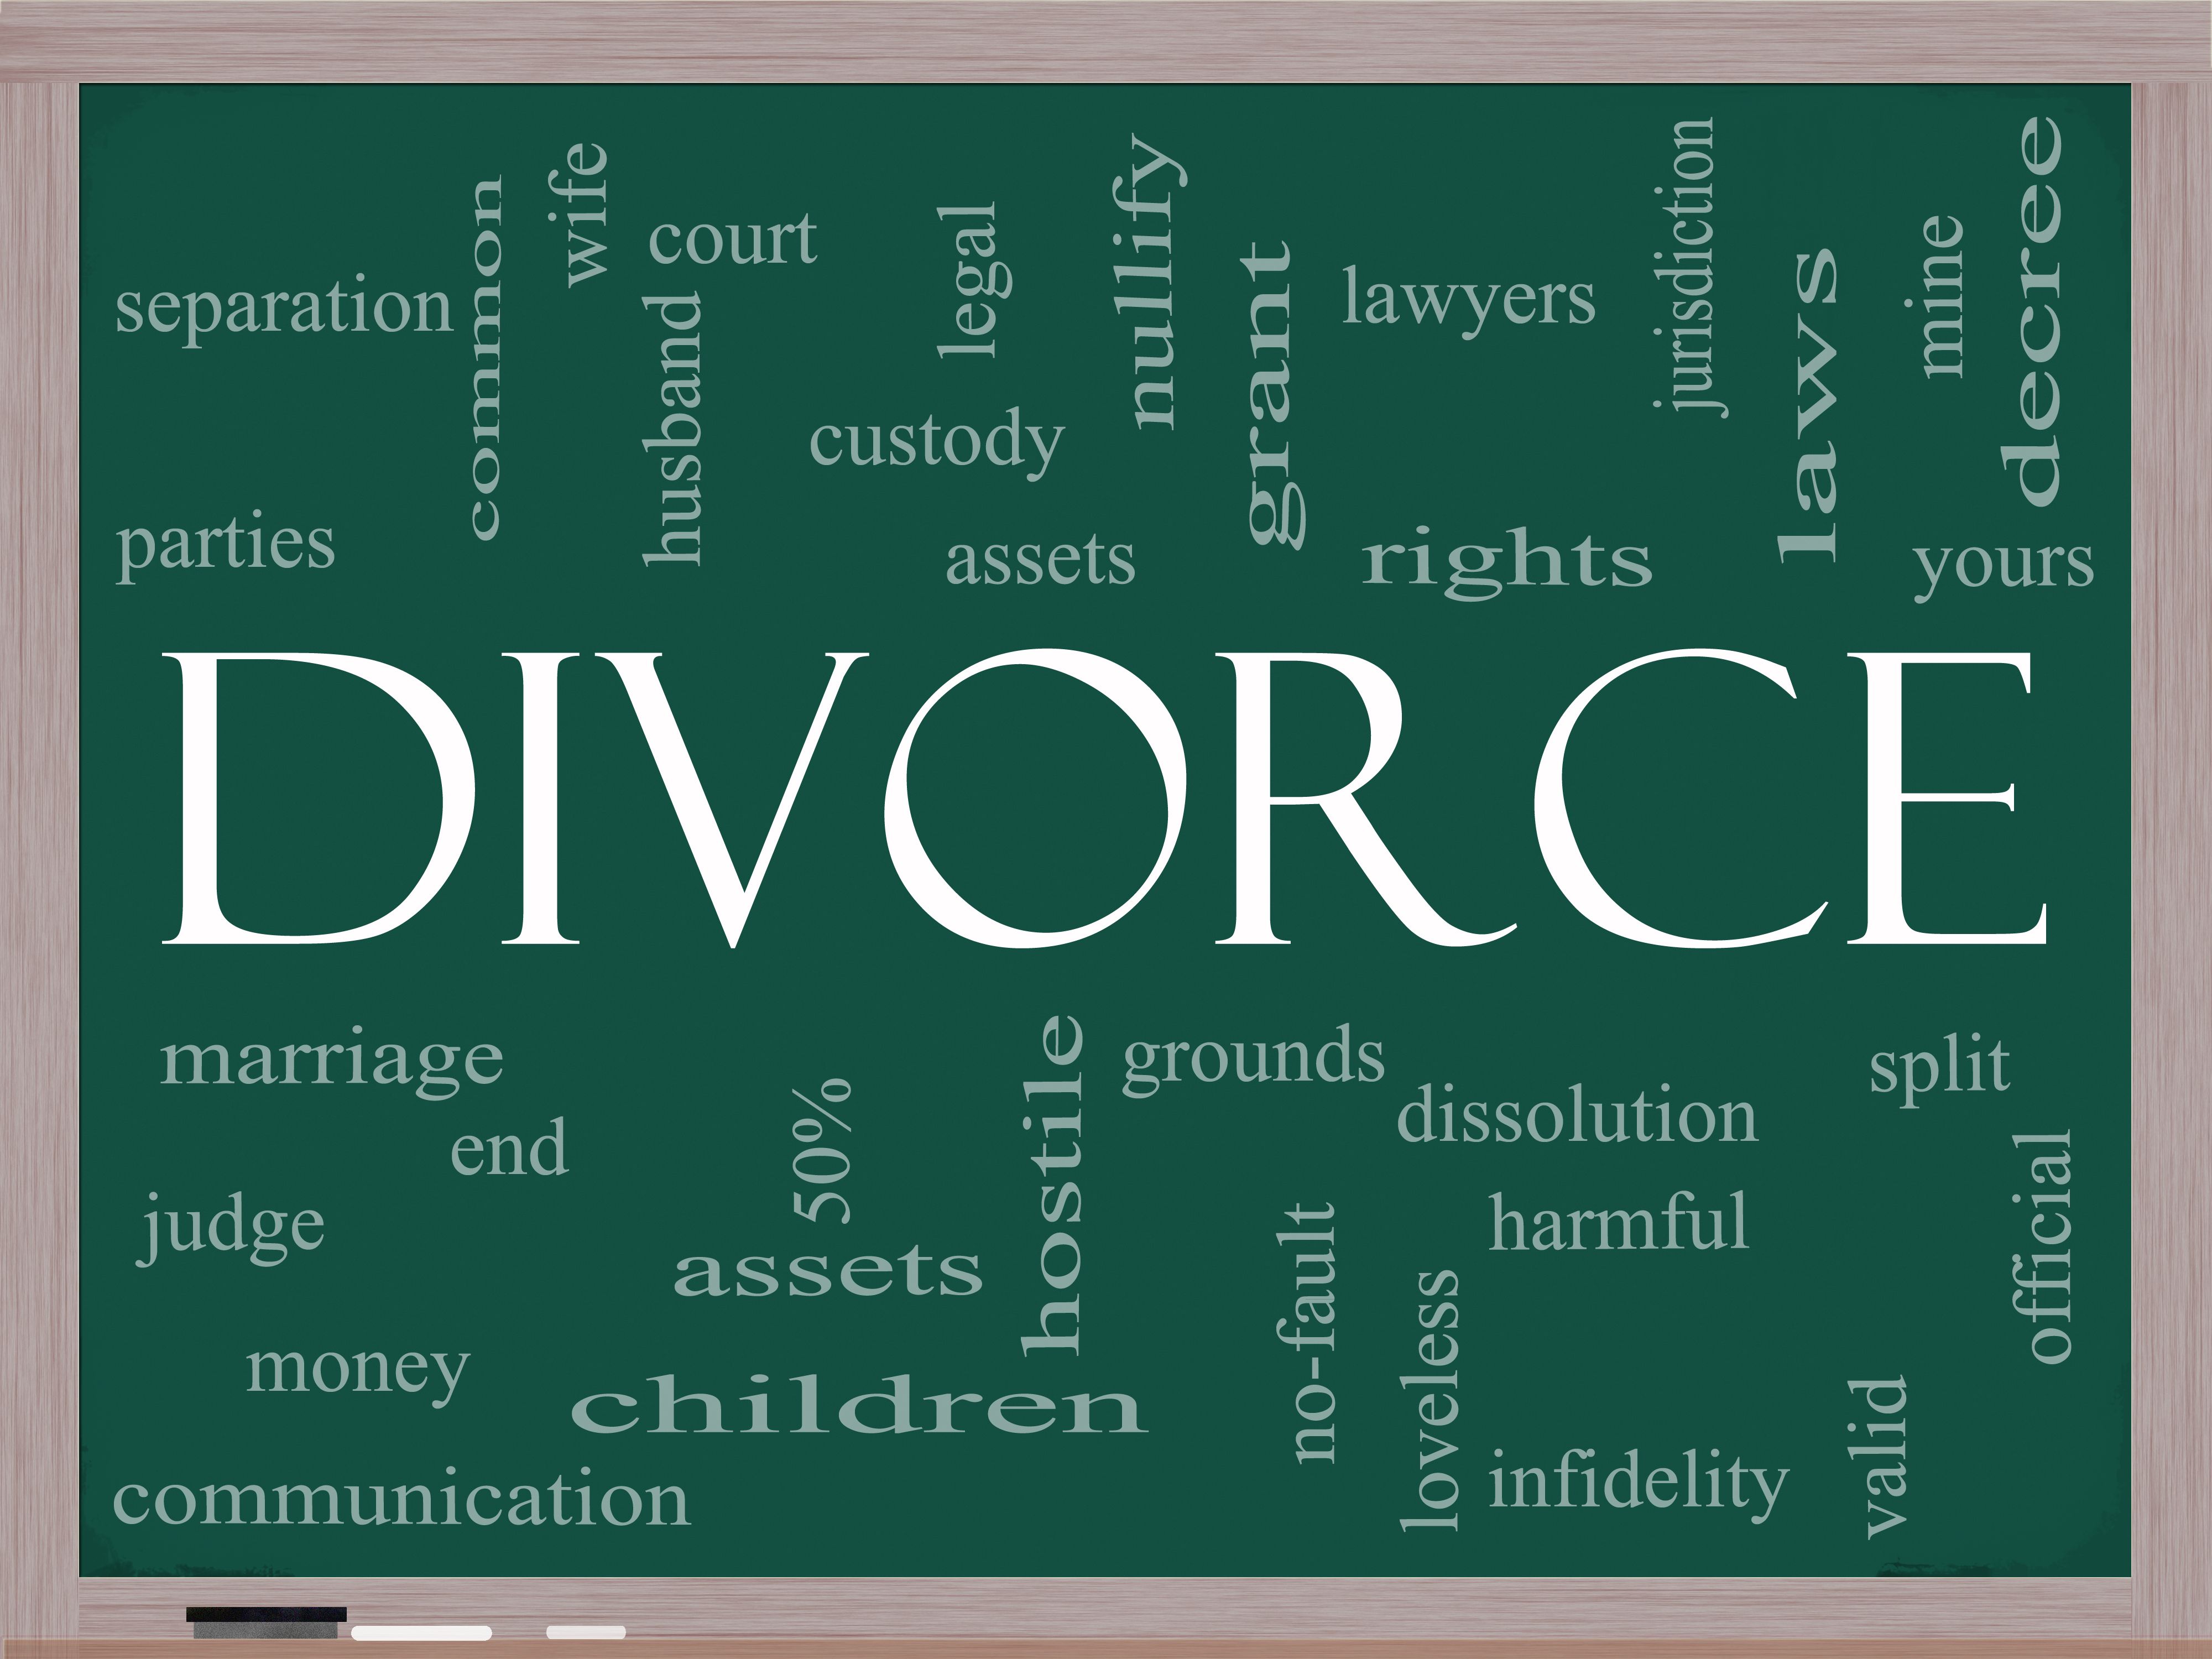 1 Way to Divorce Proof Your Marriage